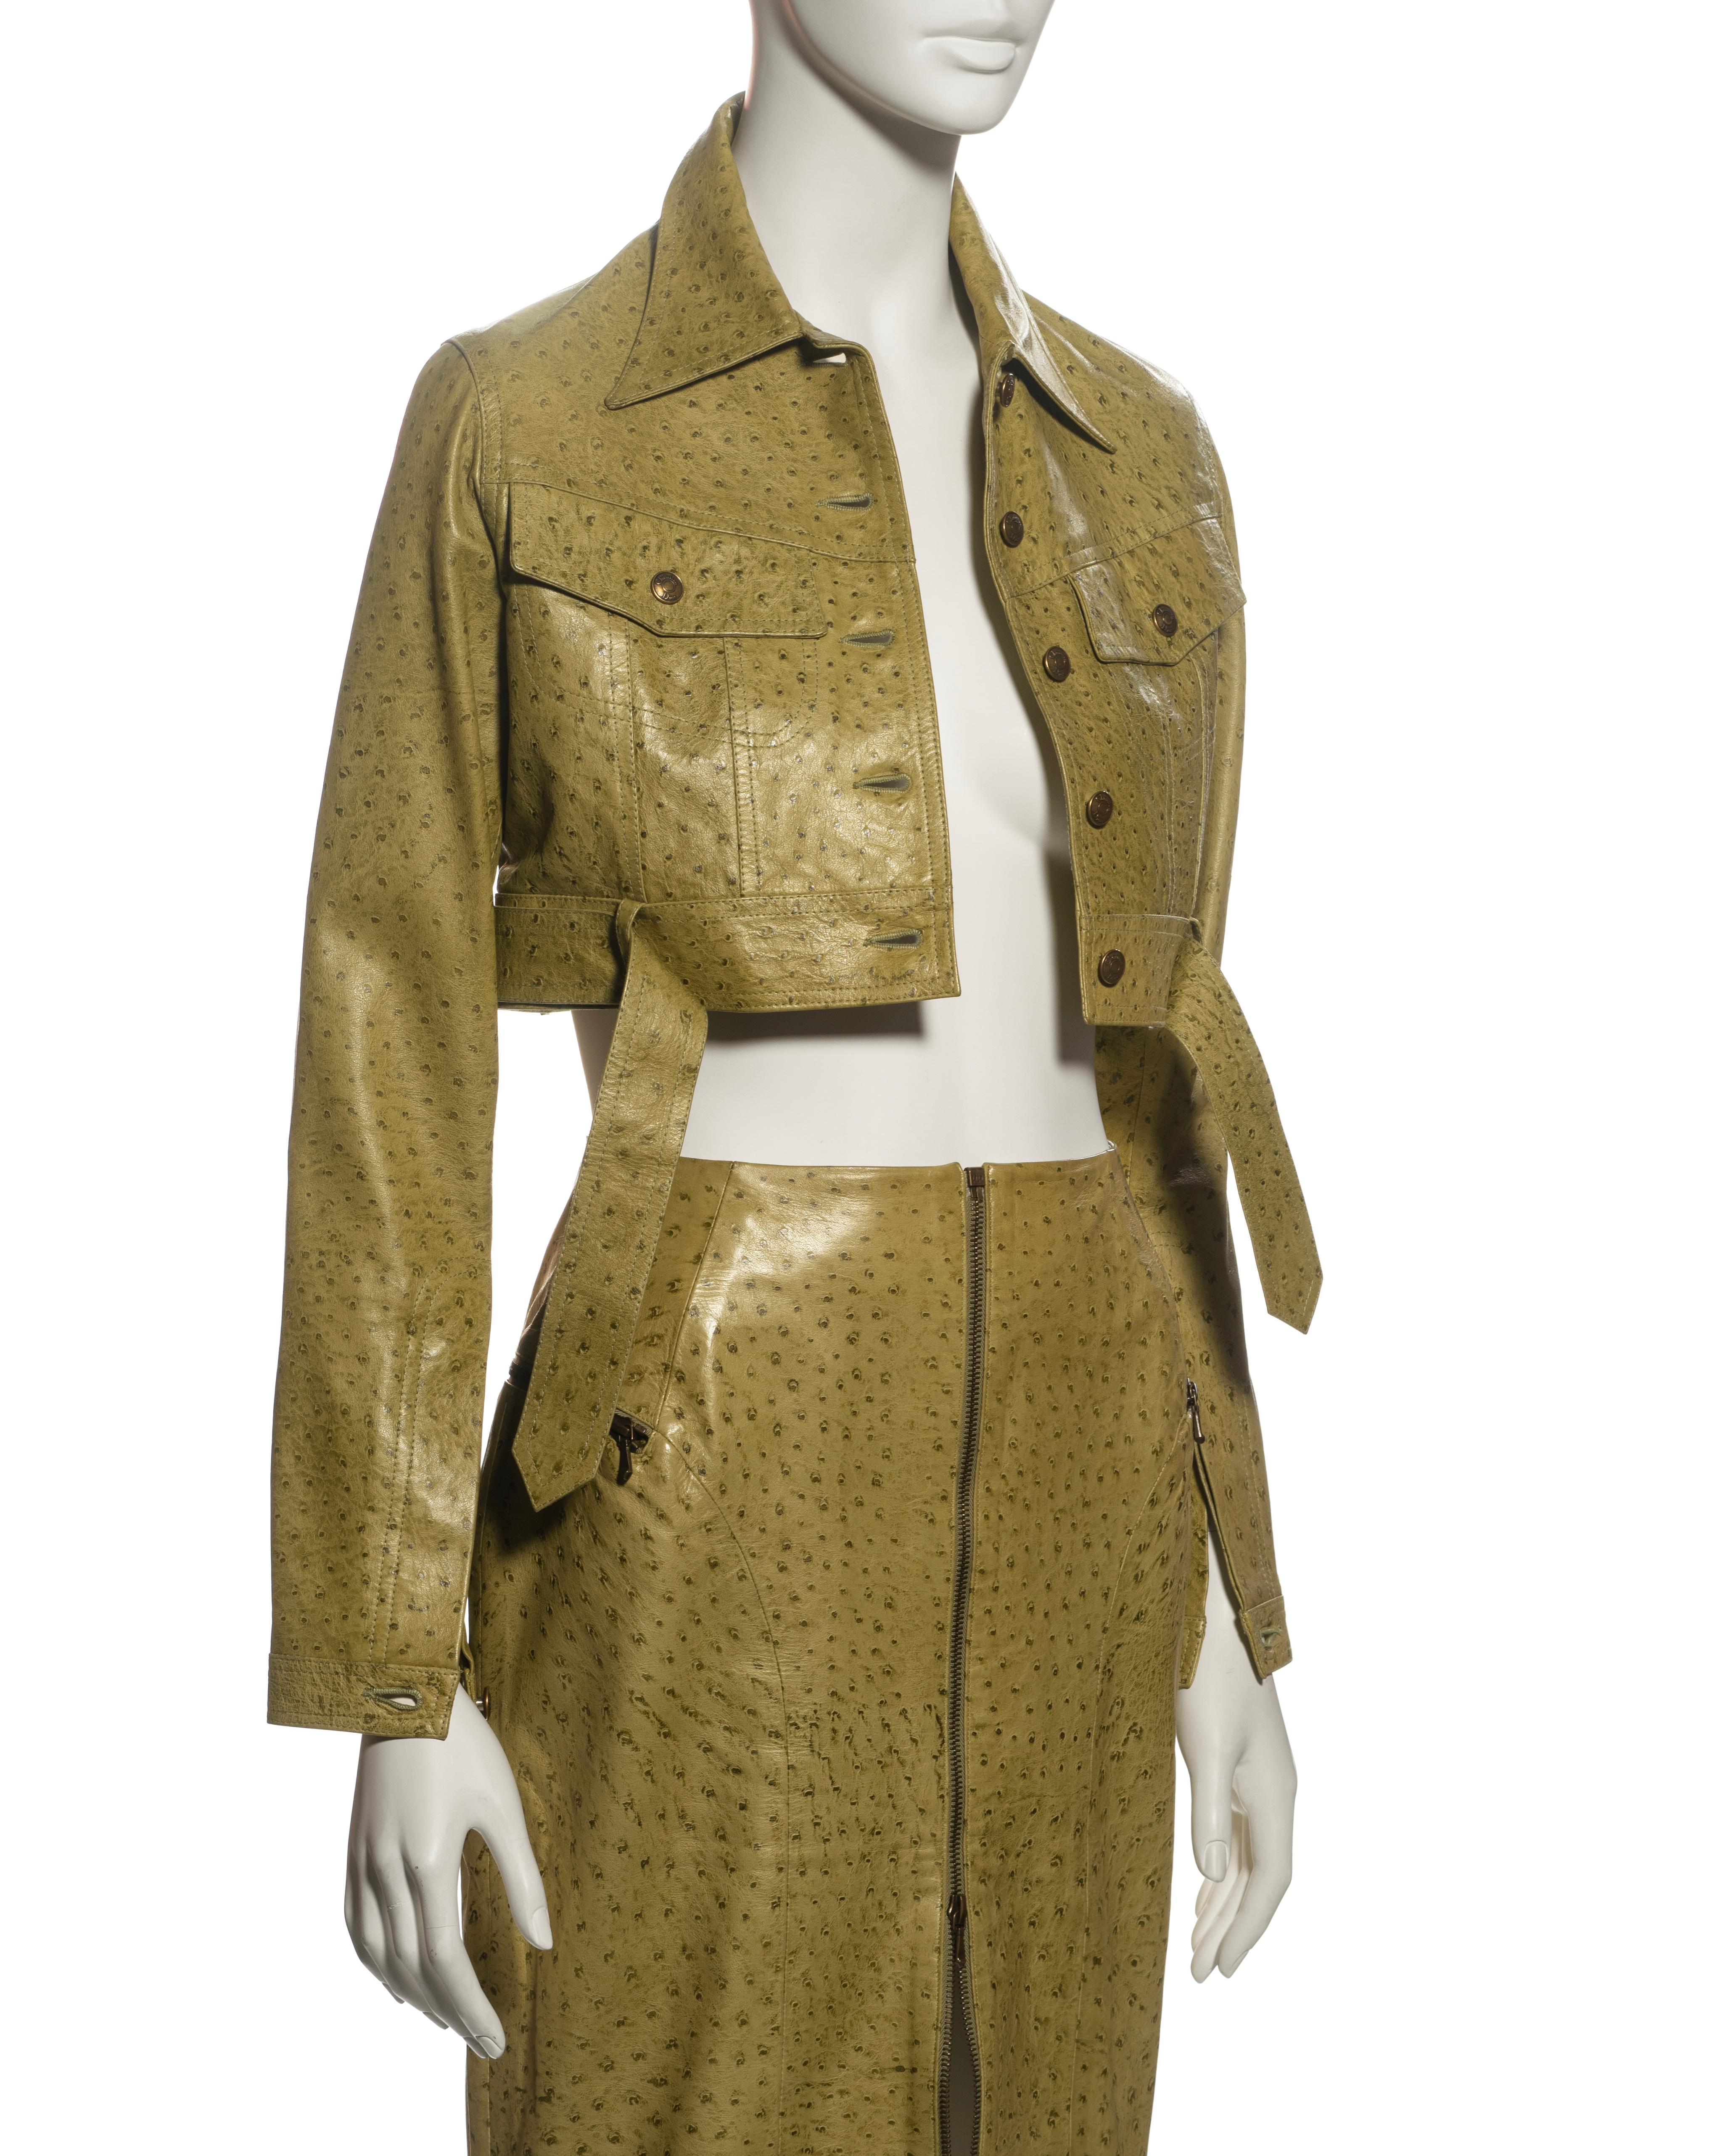 Christian Dior by John Galliano Green Lambskin Leather Jacket and Skirt, fw 2000 4